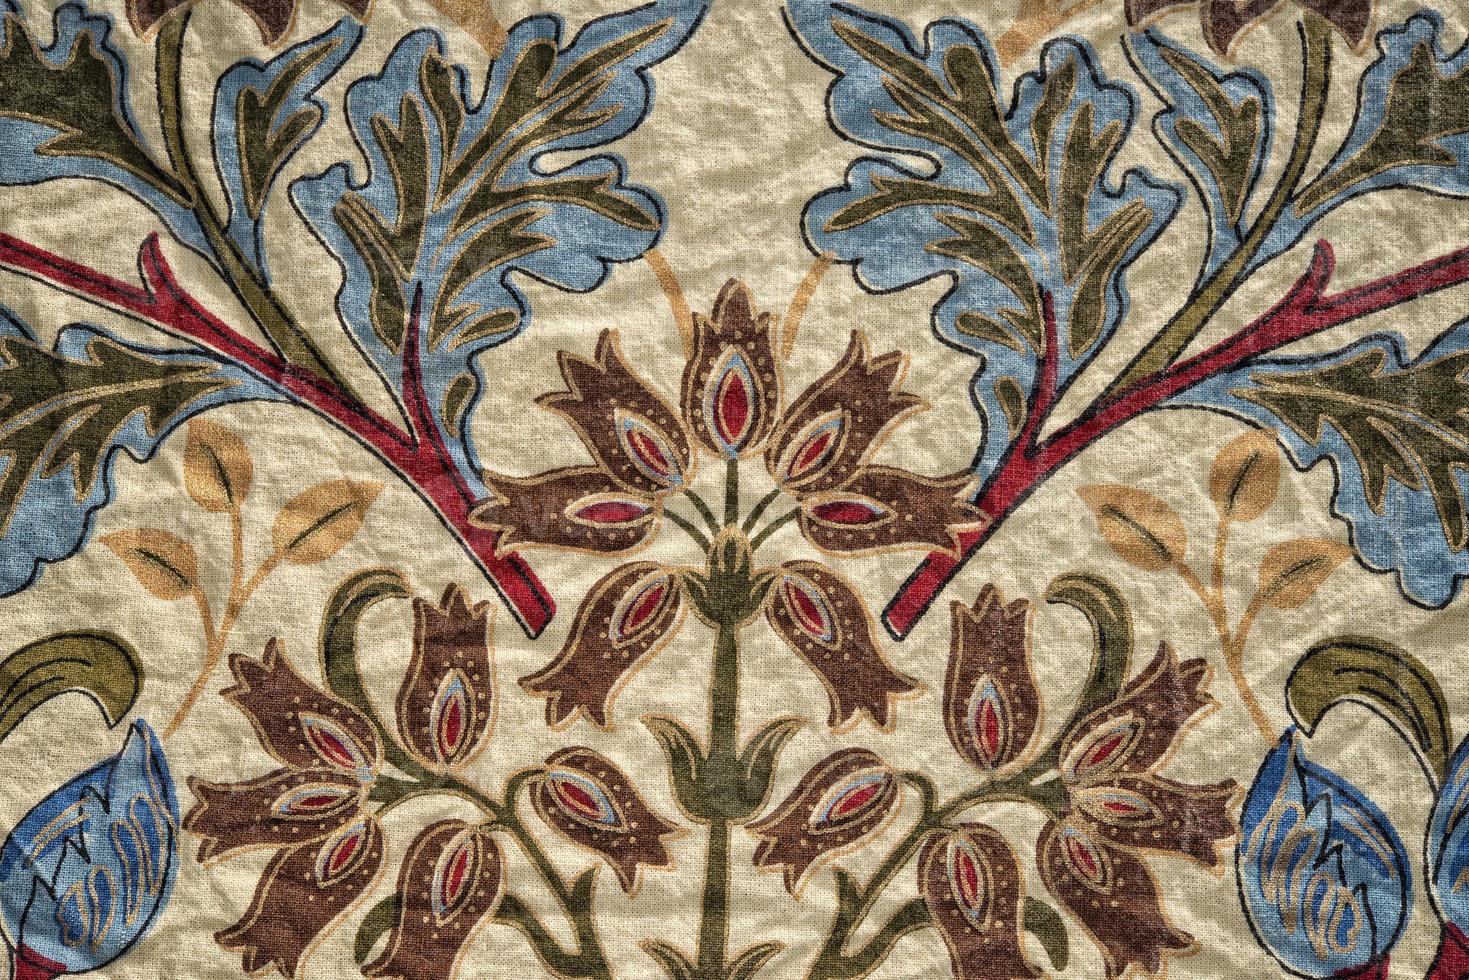 medieval fabric detail photo